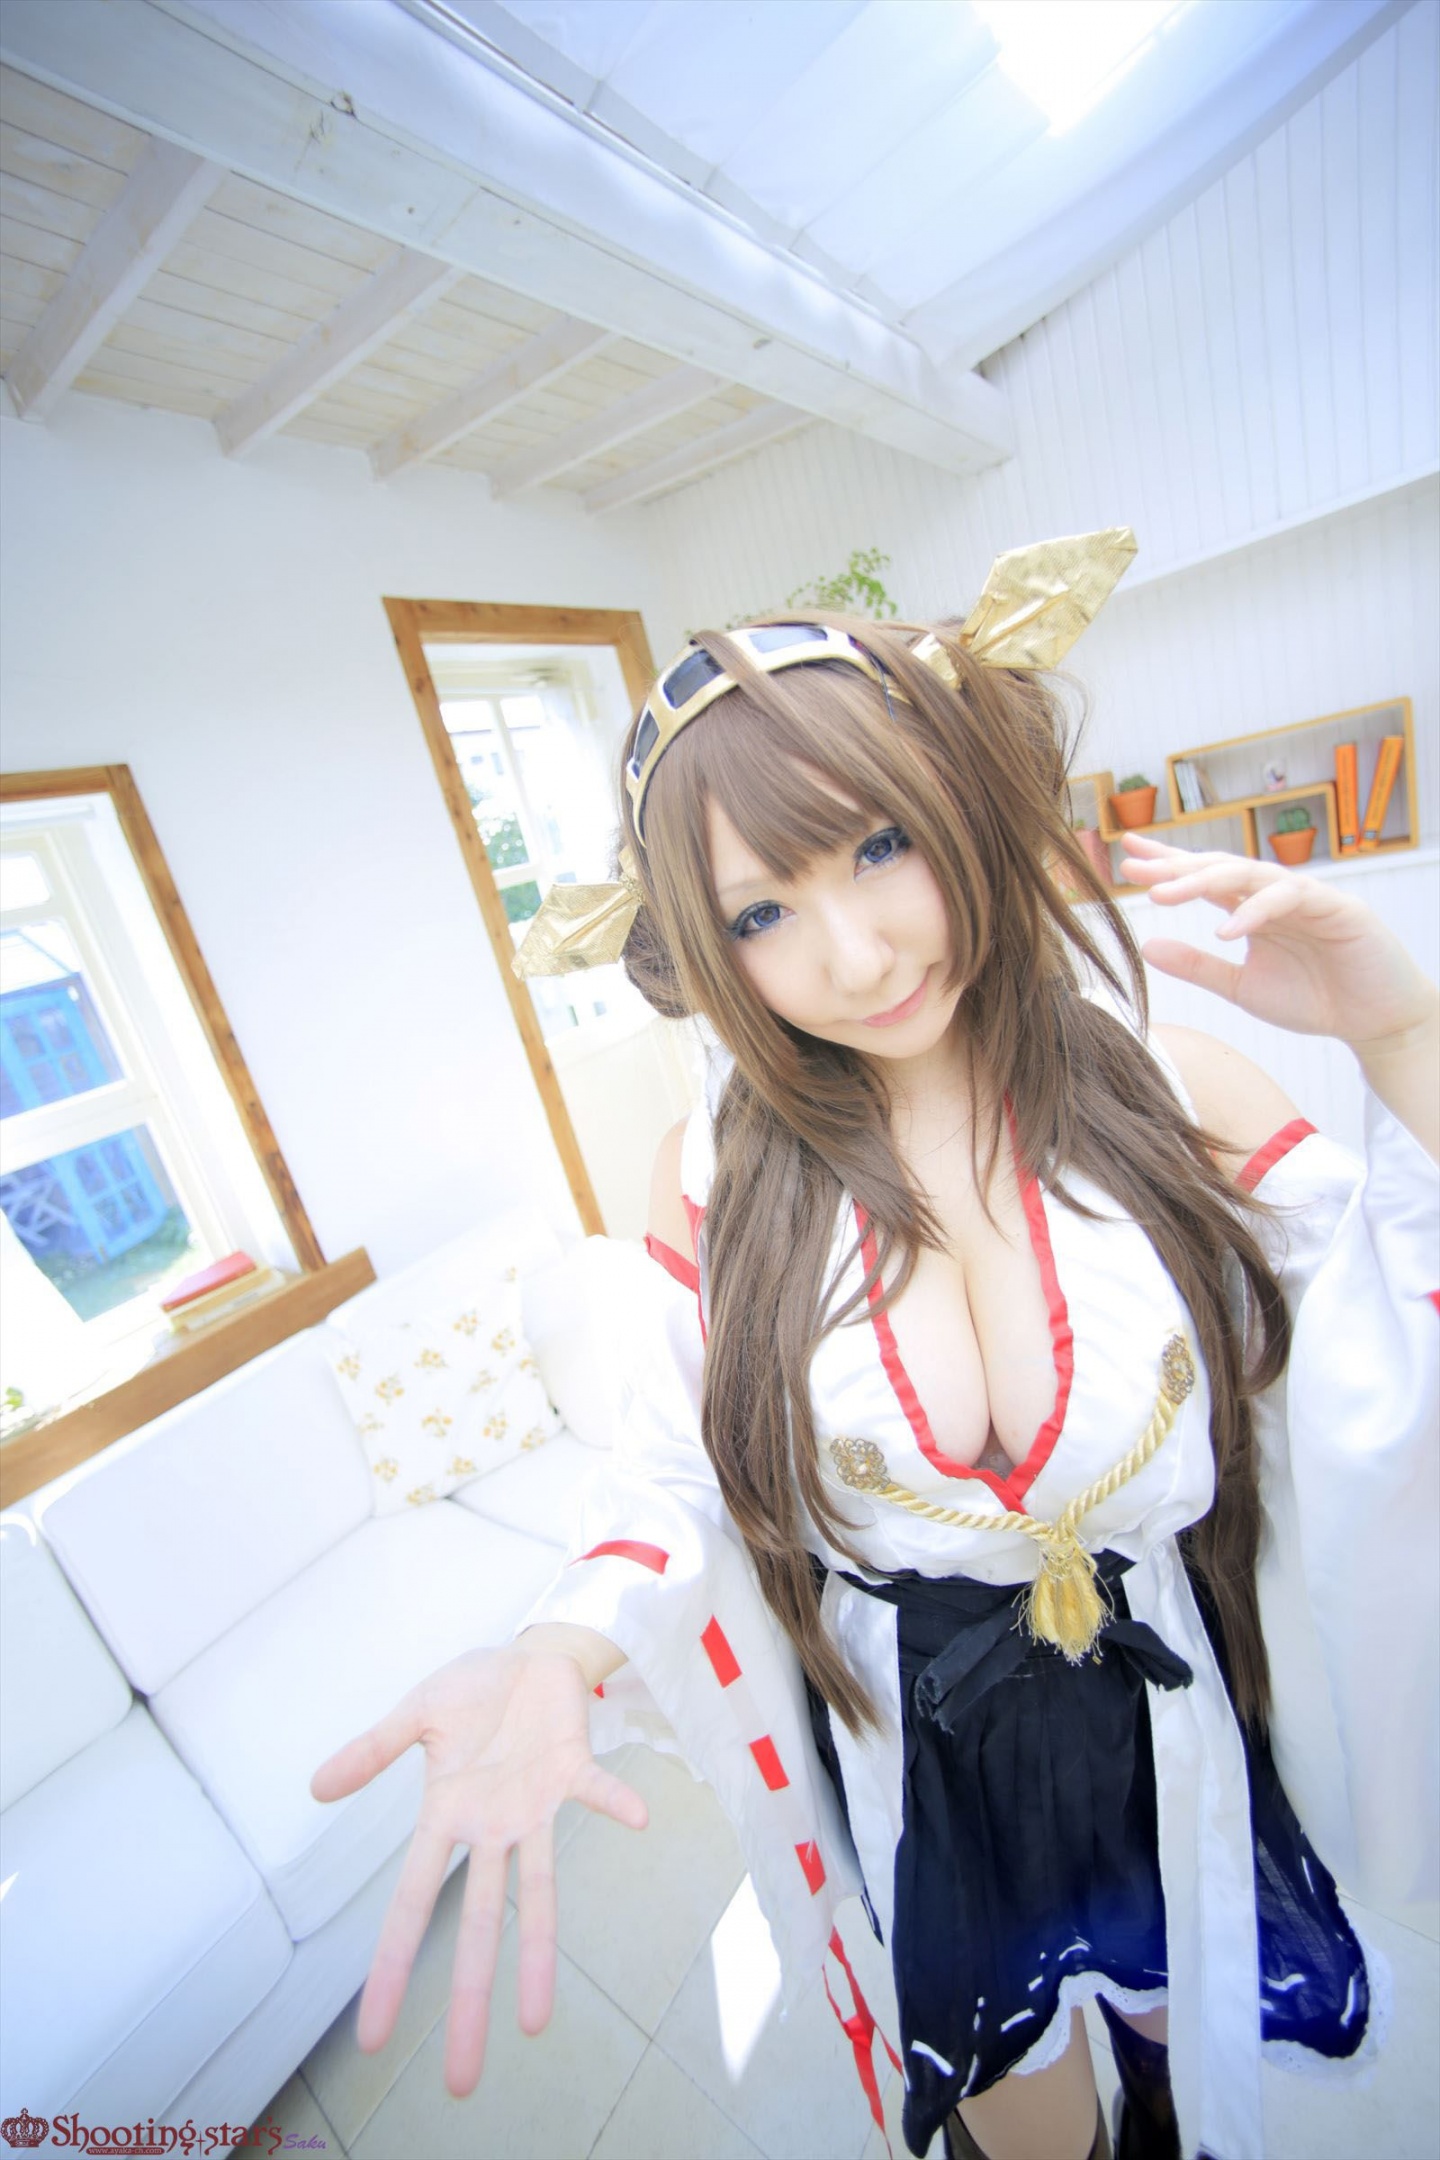 [Cospley套图] Sexy Kongou from Kantai Collection under the water 之清新养眼系列 [P1]